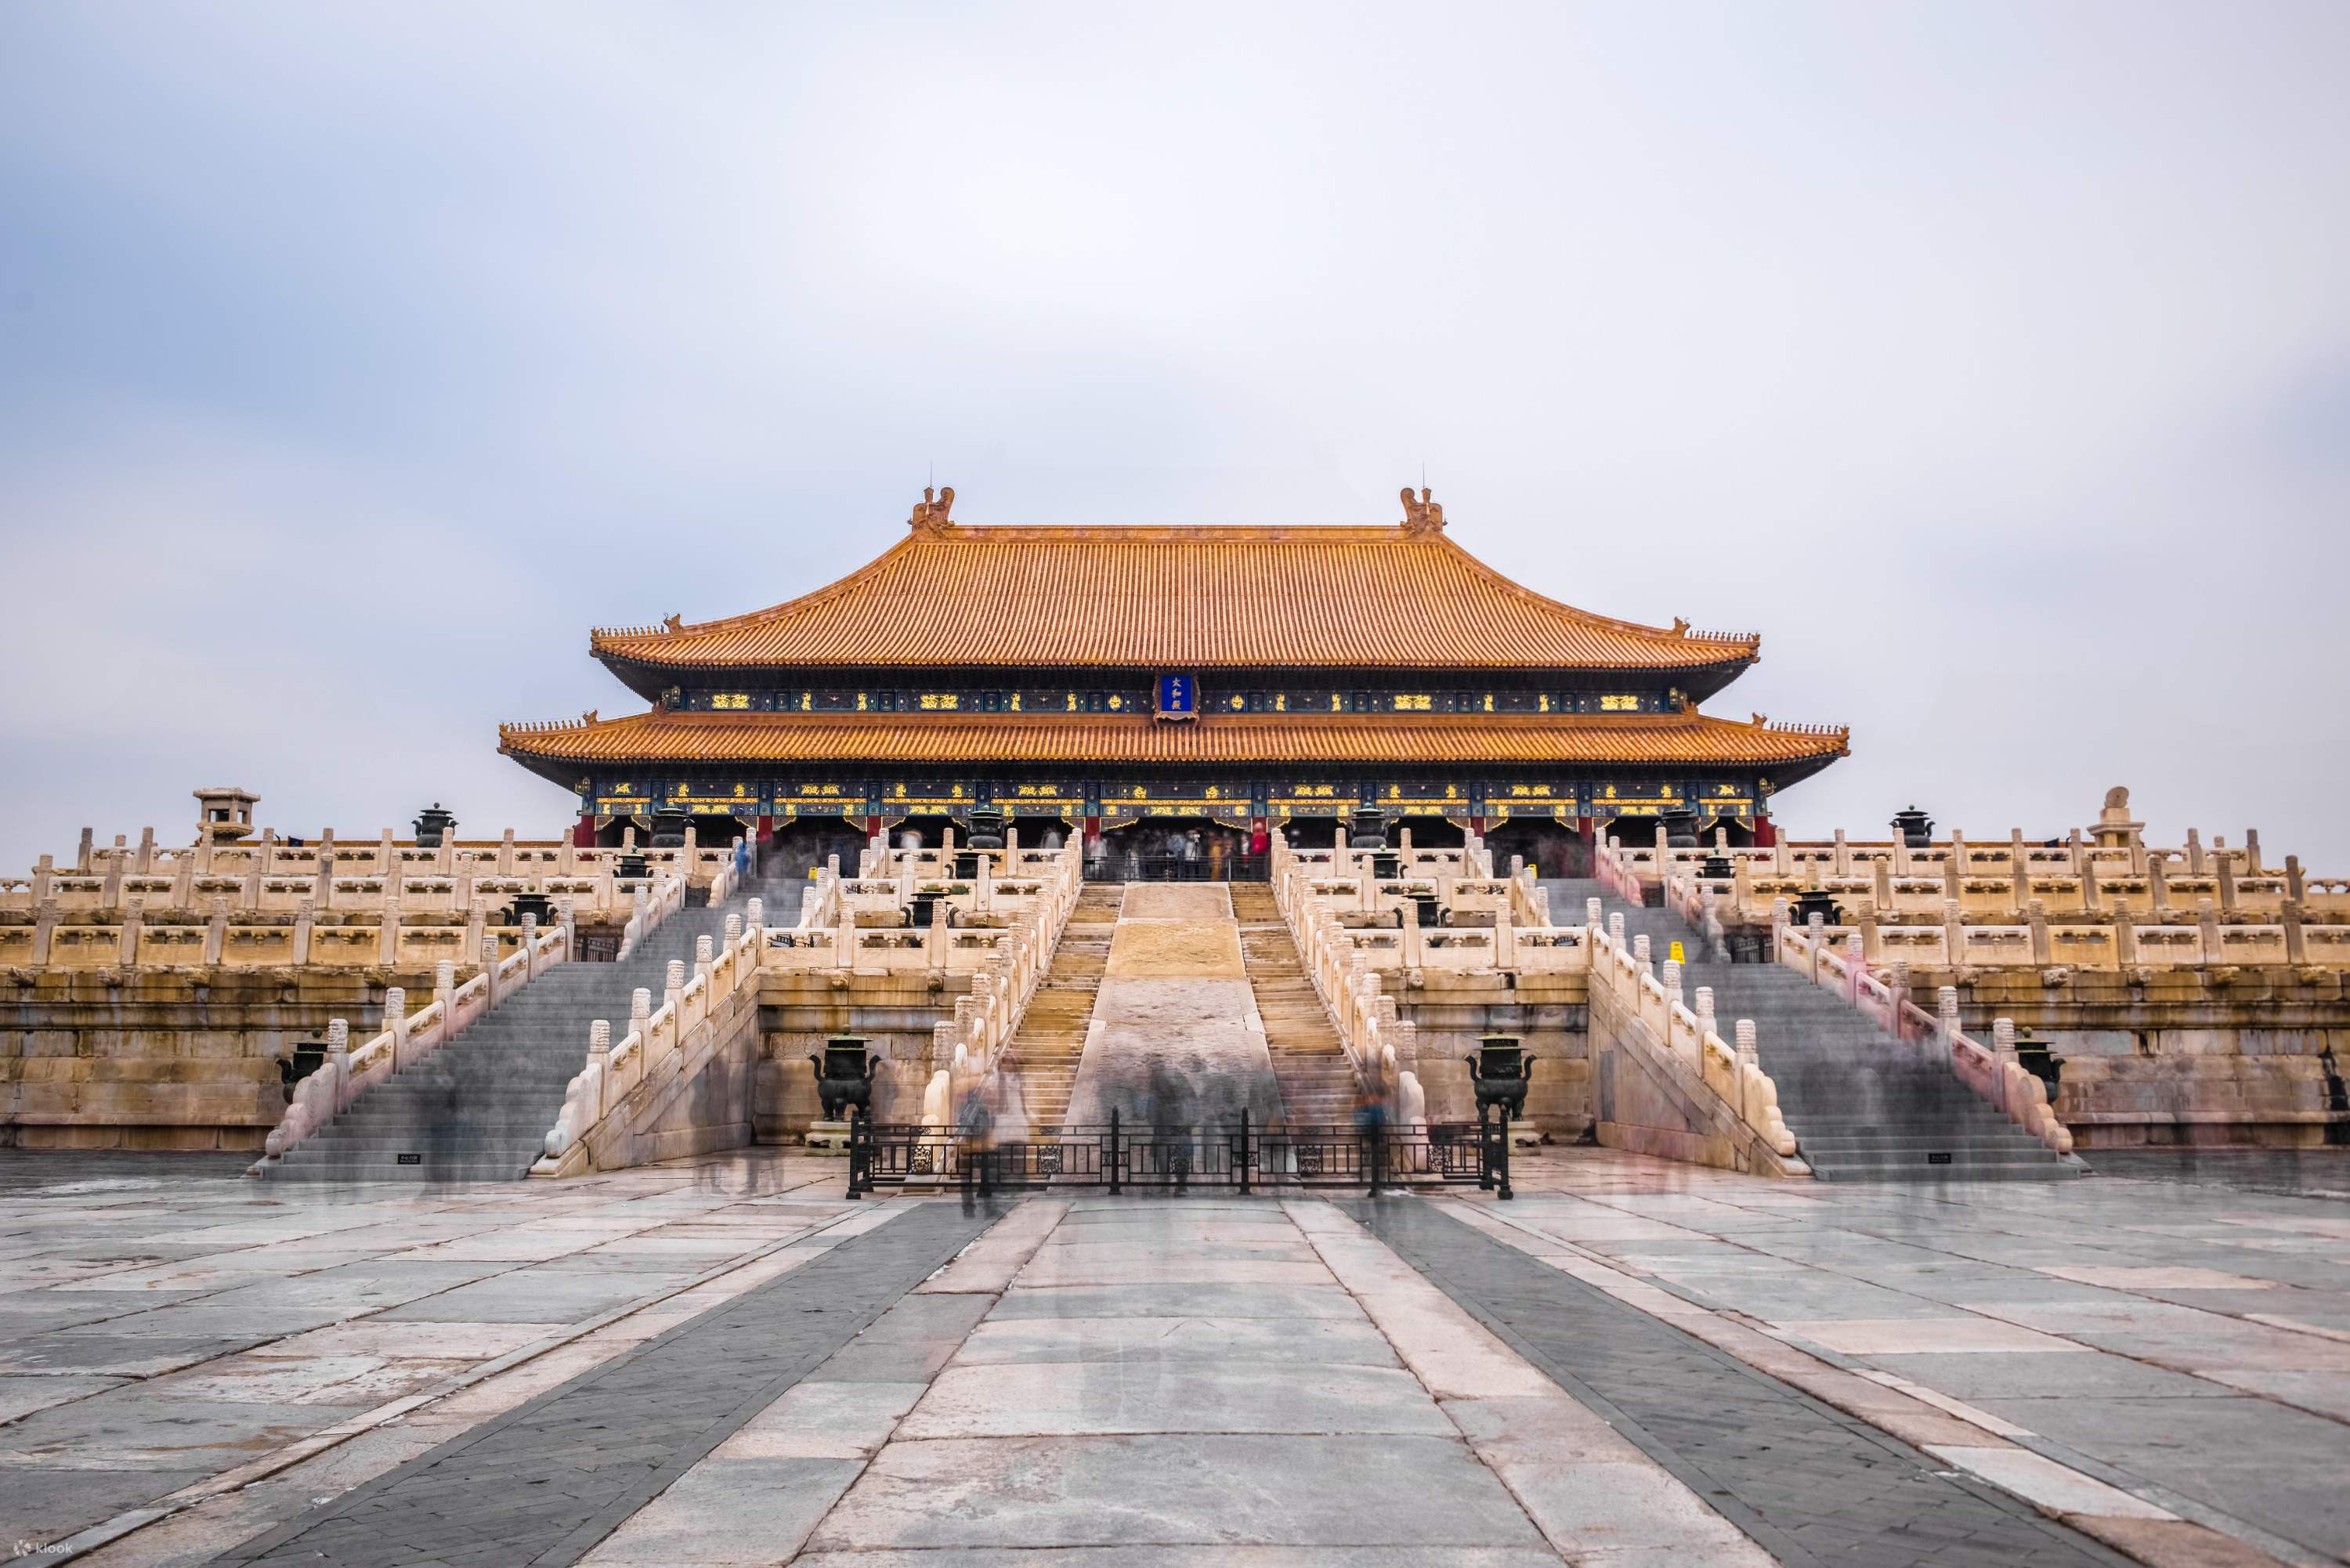 Forbidden City is the world's most popular museum - Asia Times